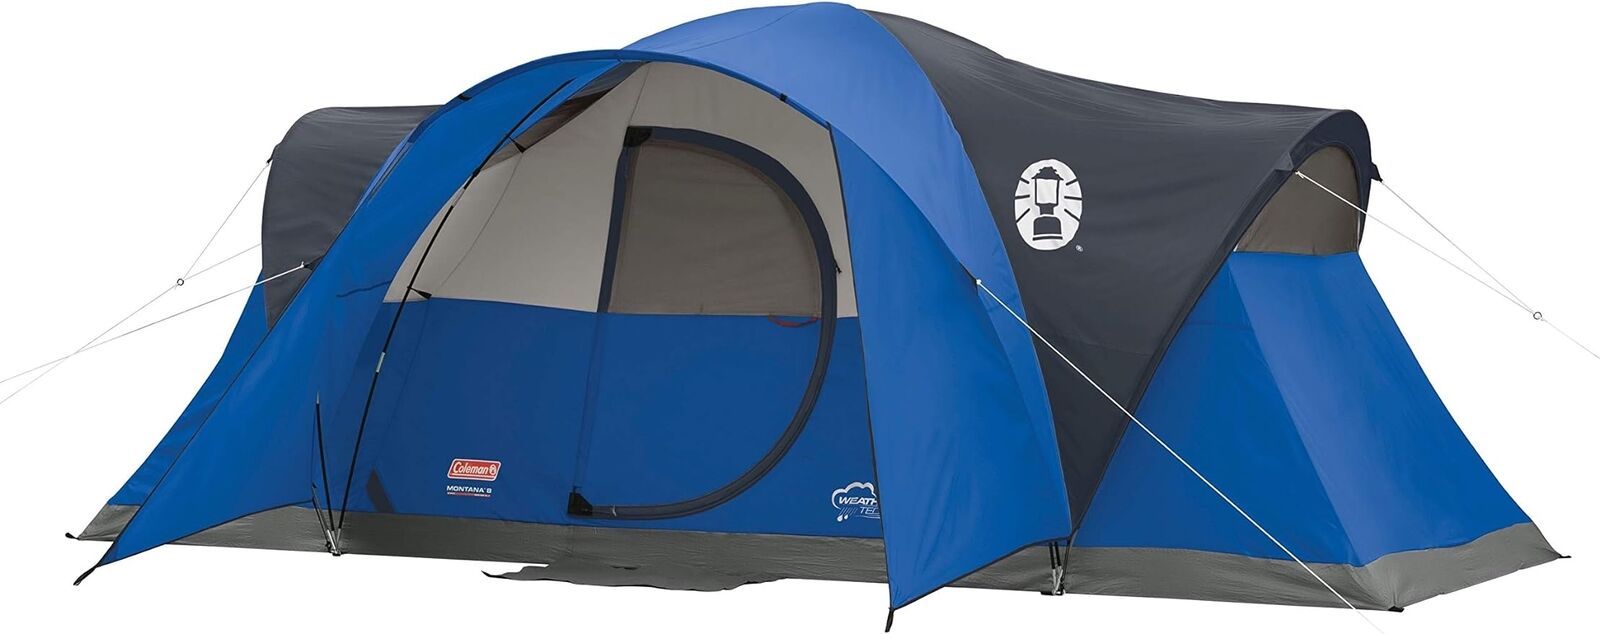 Montana Camping Tent, 6/8 Person Family Tent with Included Rainfly, Carry Bag